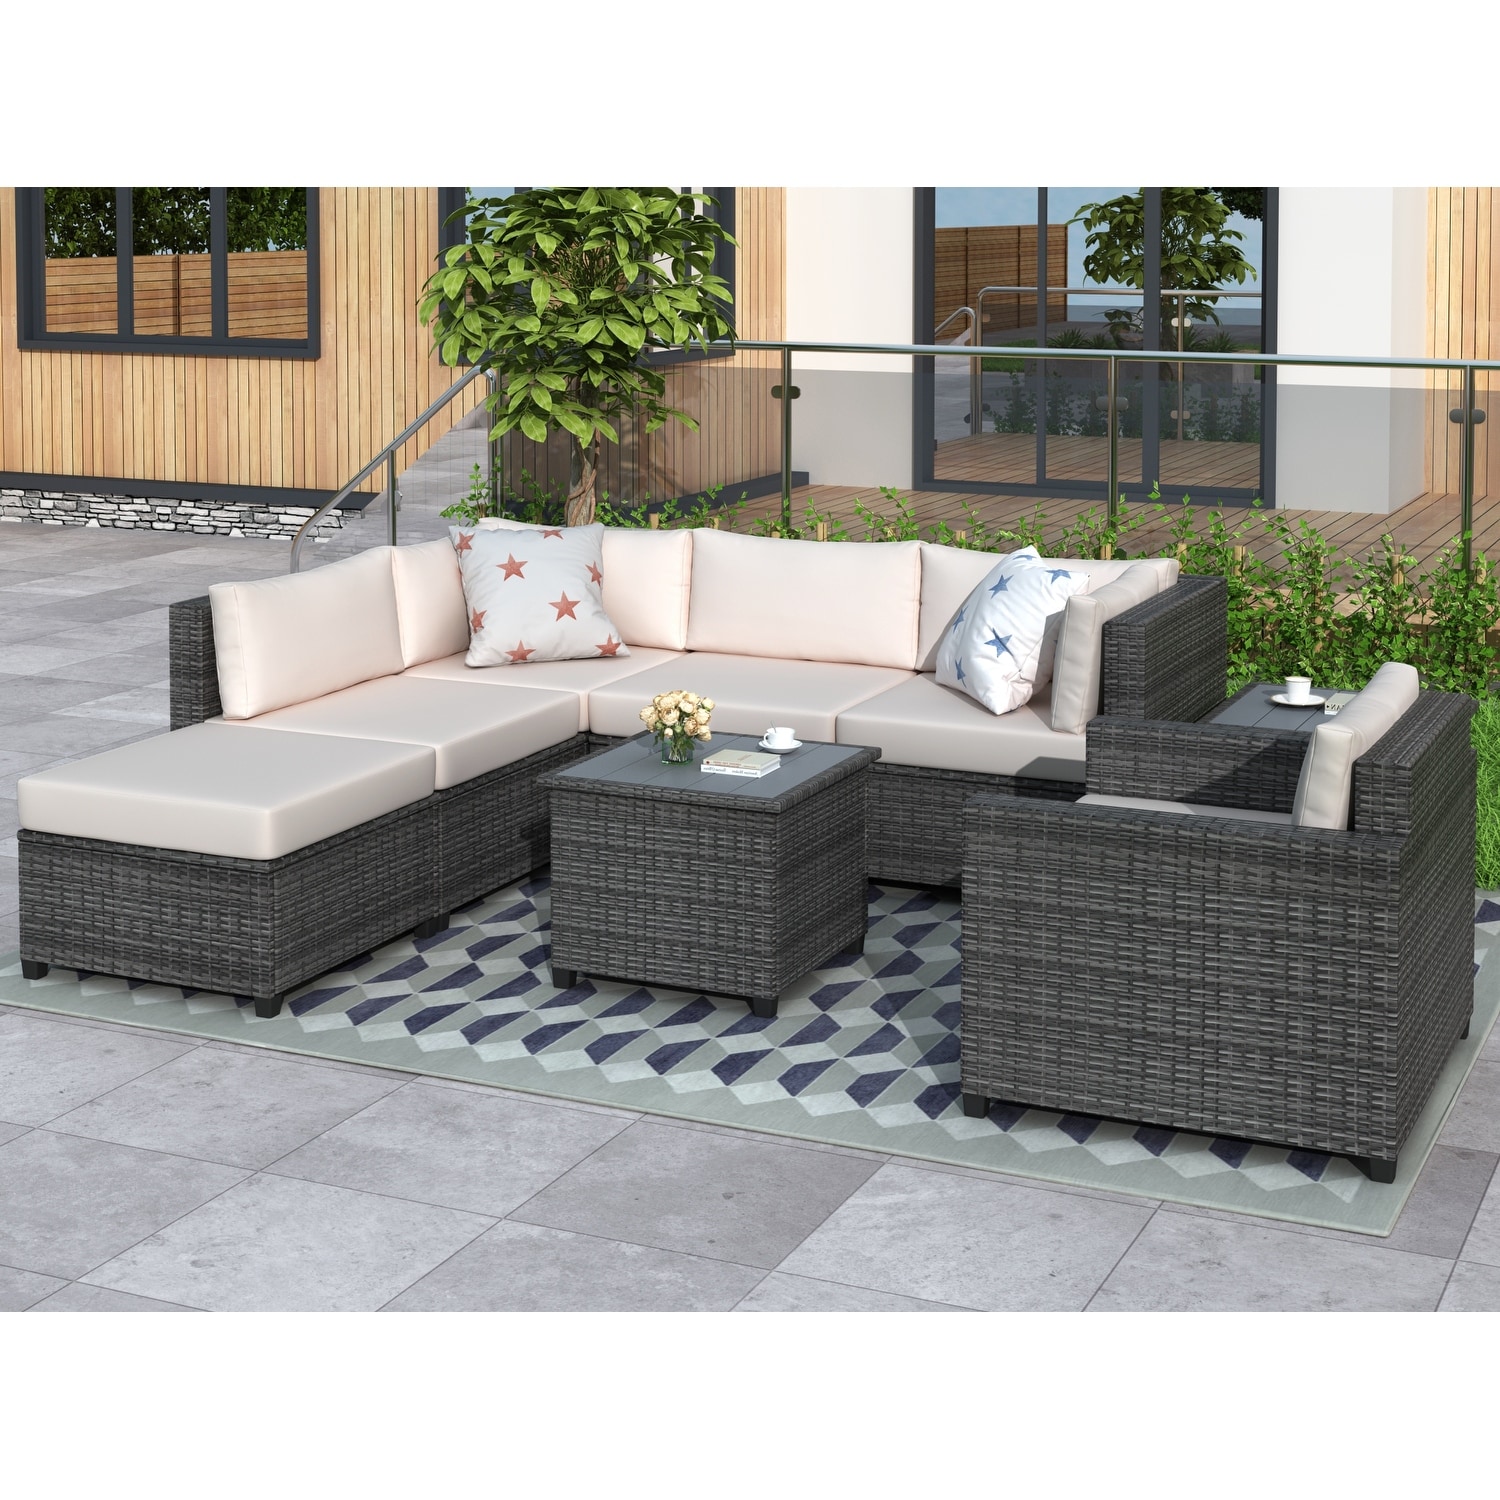 8 Piece Rattan Sectional Seating Group With Cushions  Patio Furniture Sets  Outdoor Wicker Sectional